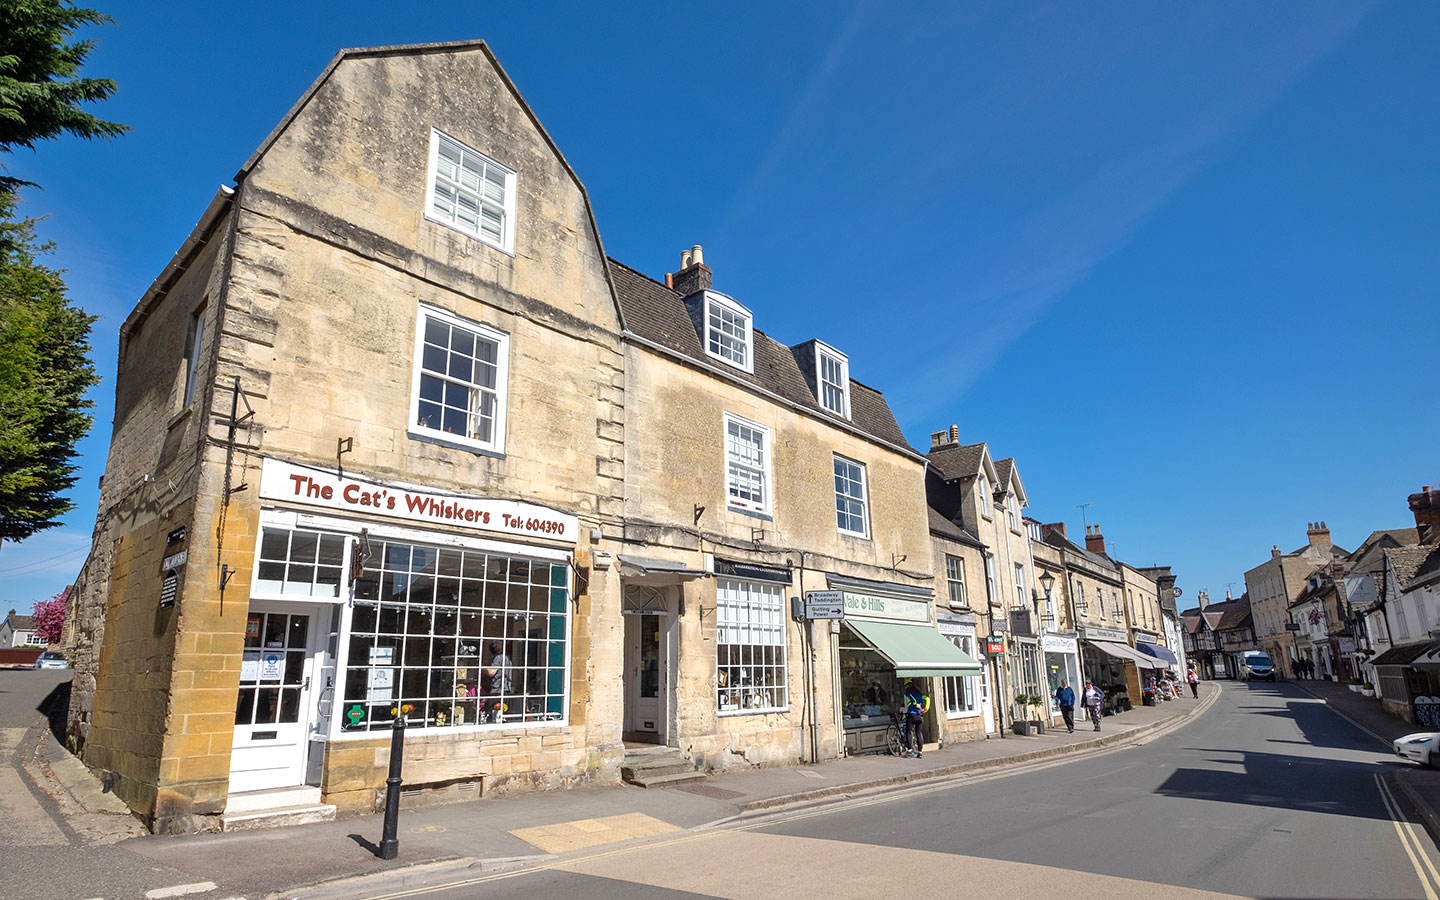 Shops in Winchcombe in the Cotswolds